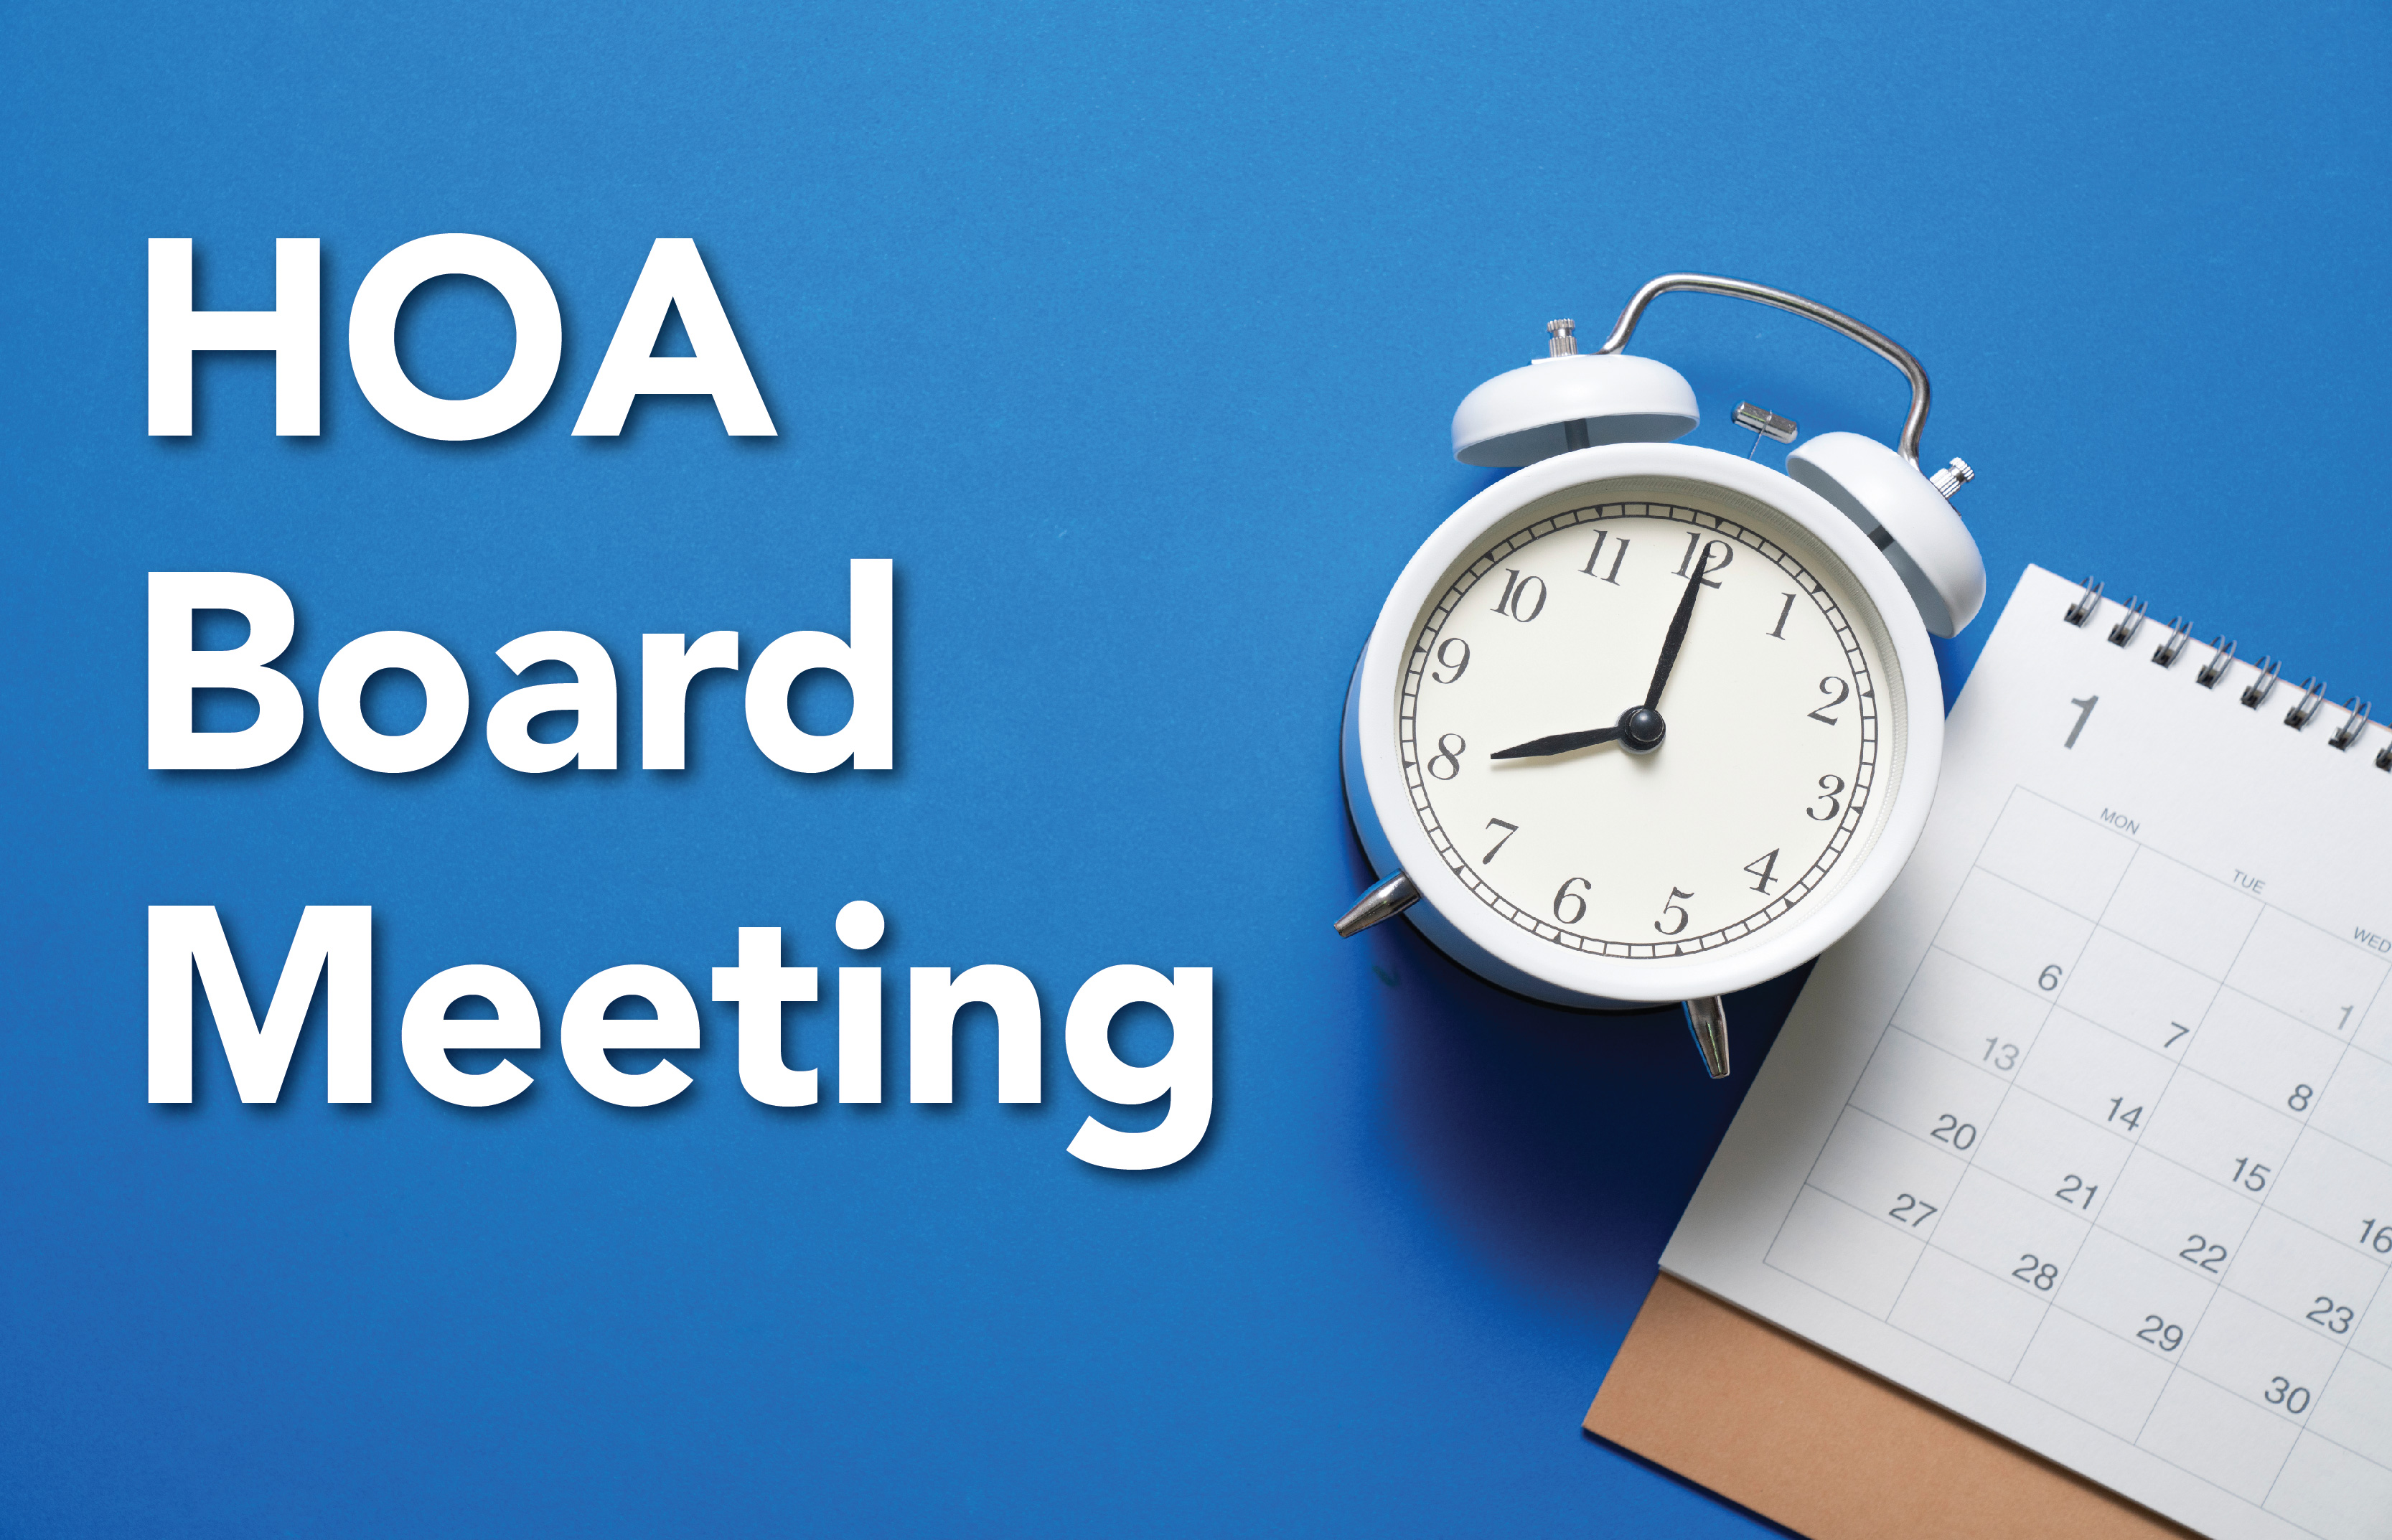 Copperfield Place Village HOA Board Meeting Set for March 25